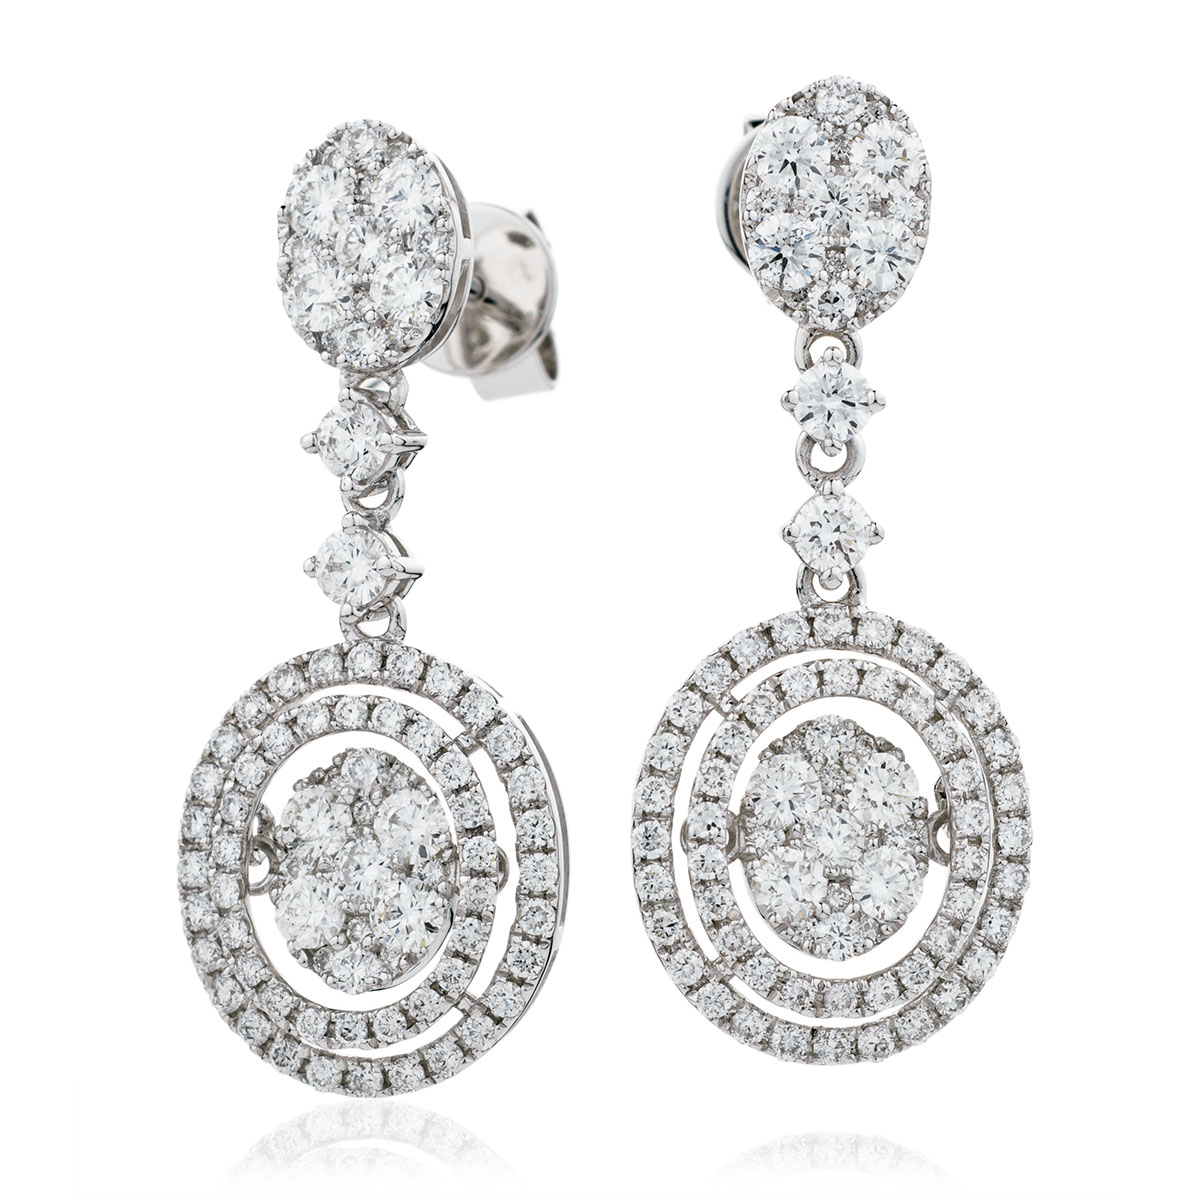 Moveable Round Drop Diamond Earrings